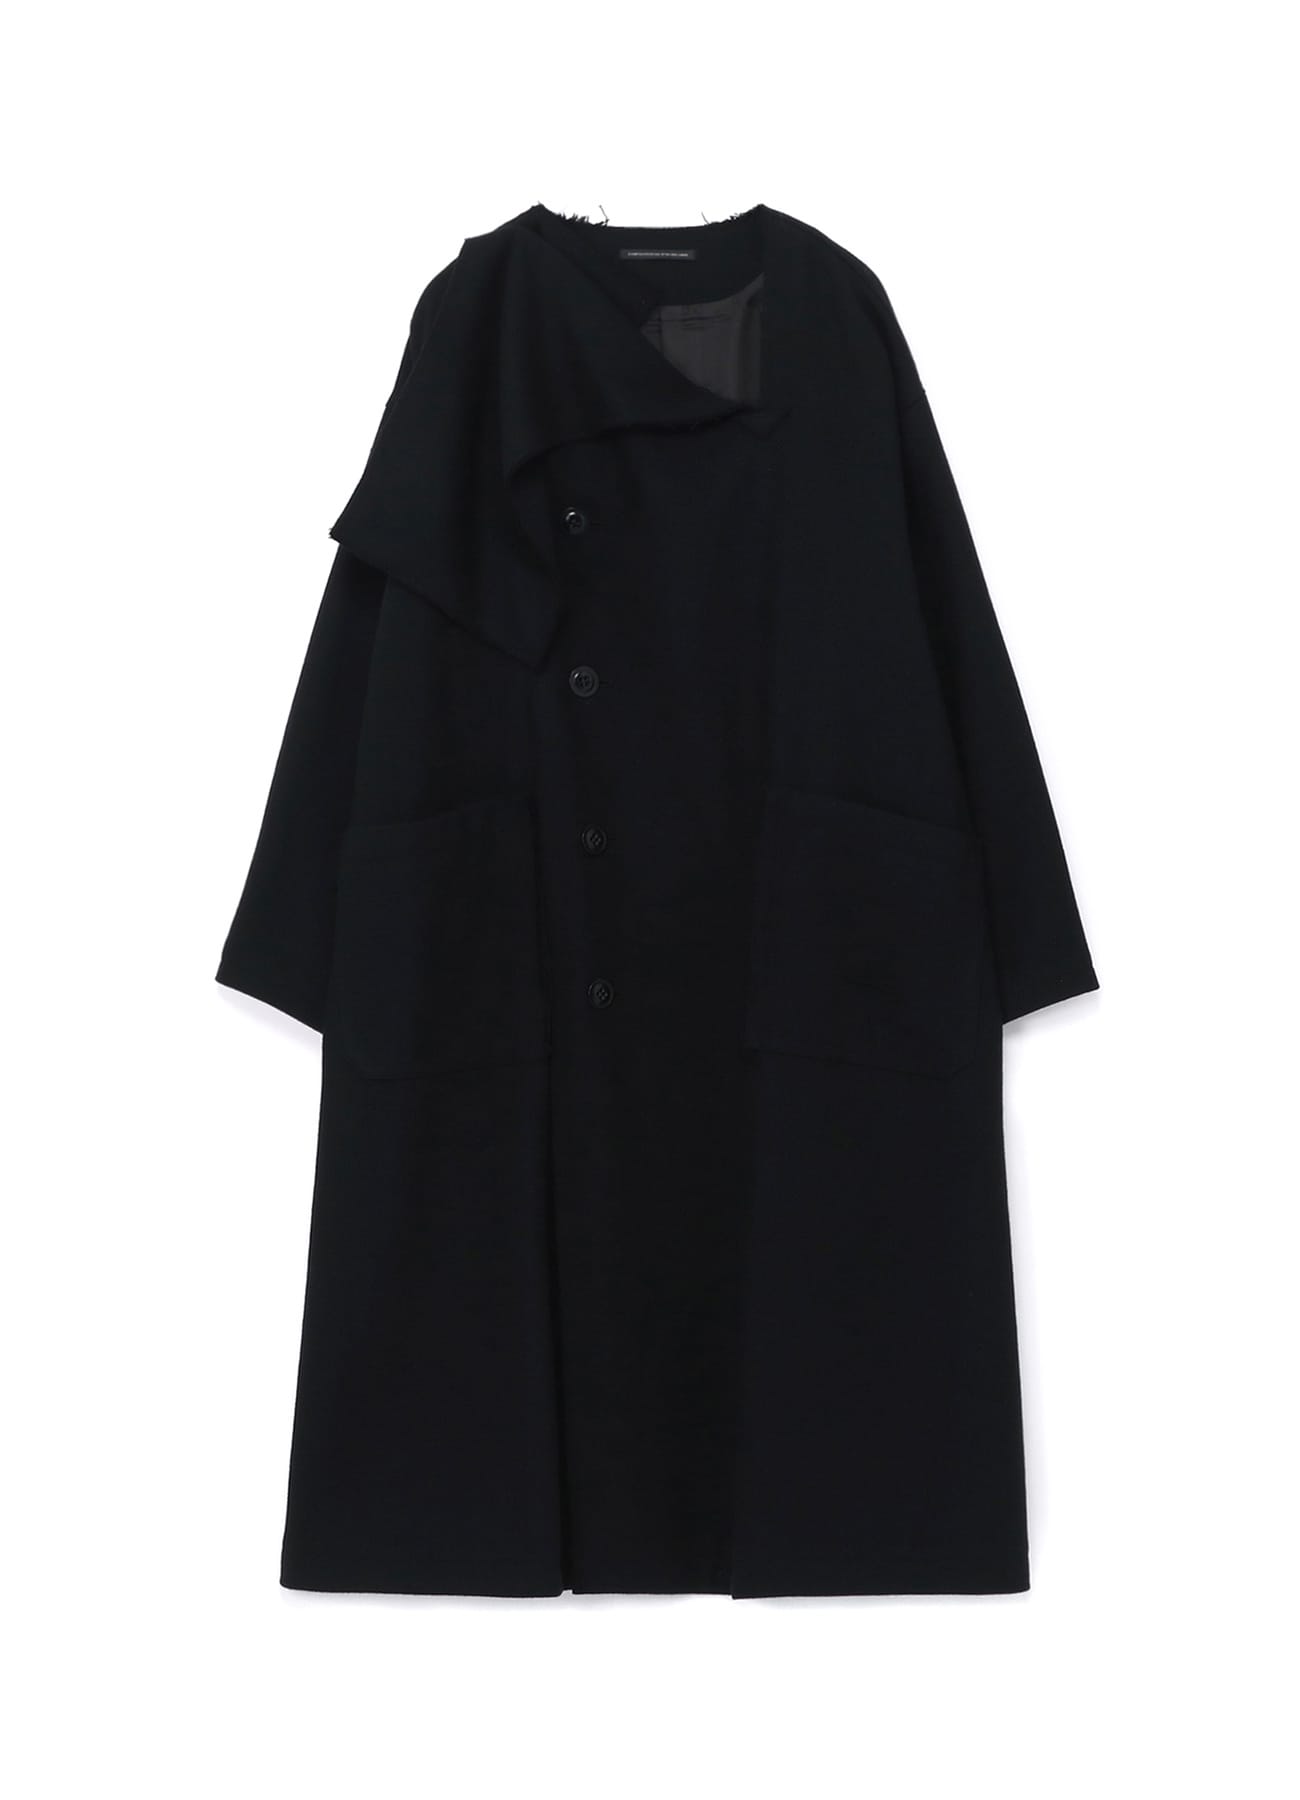 Y's｜ [Official] THE SHOP YOHJI YAMAMOTO (4/21 page)